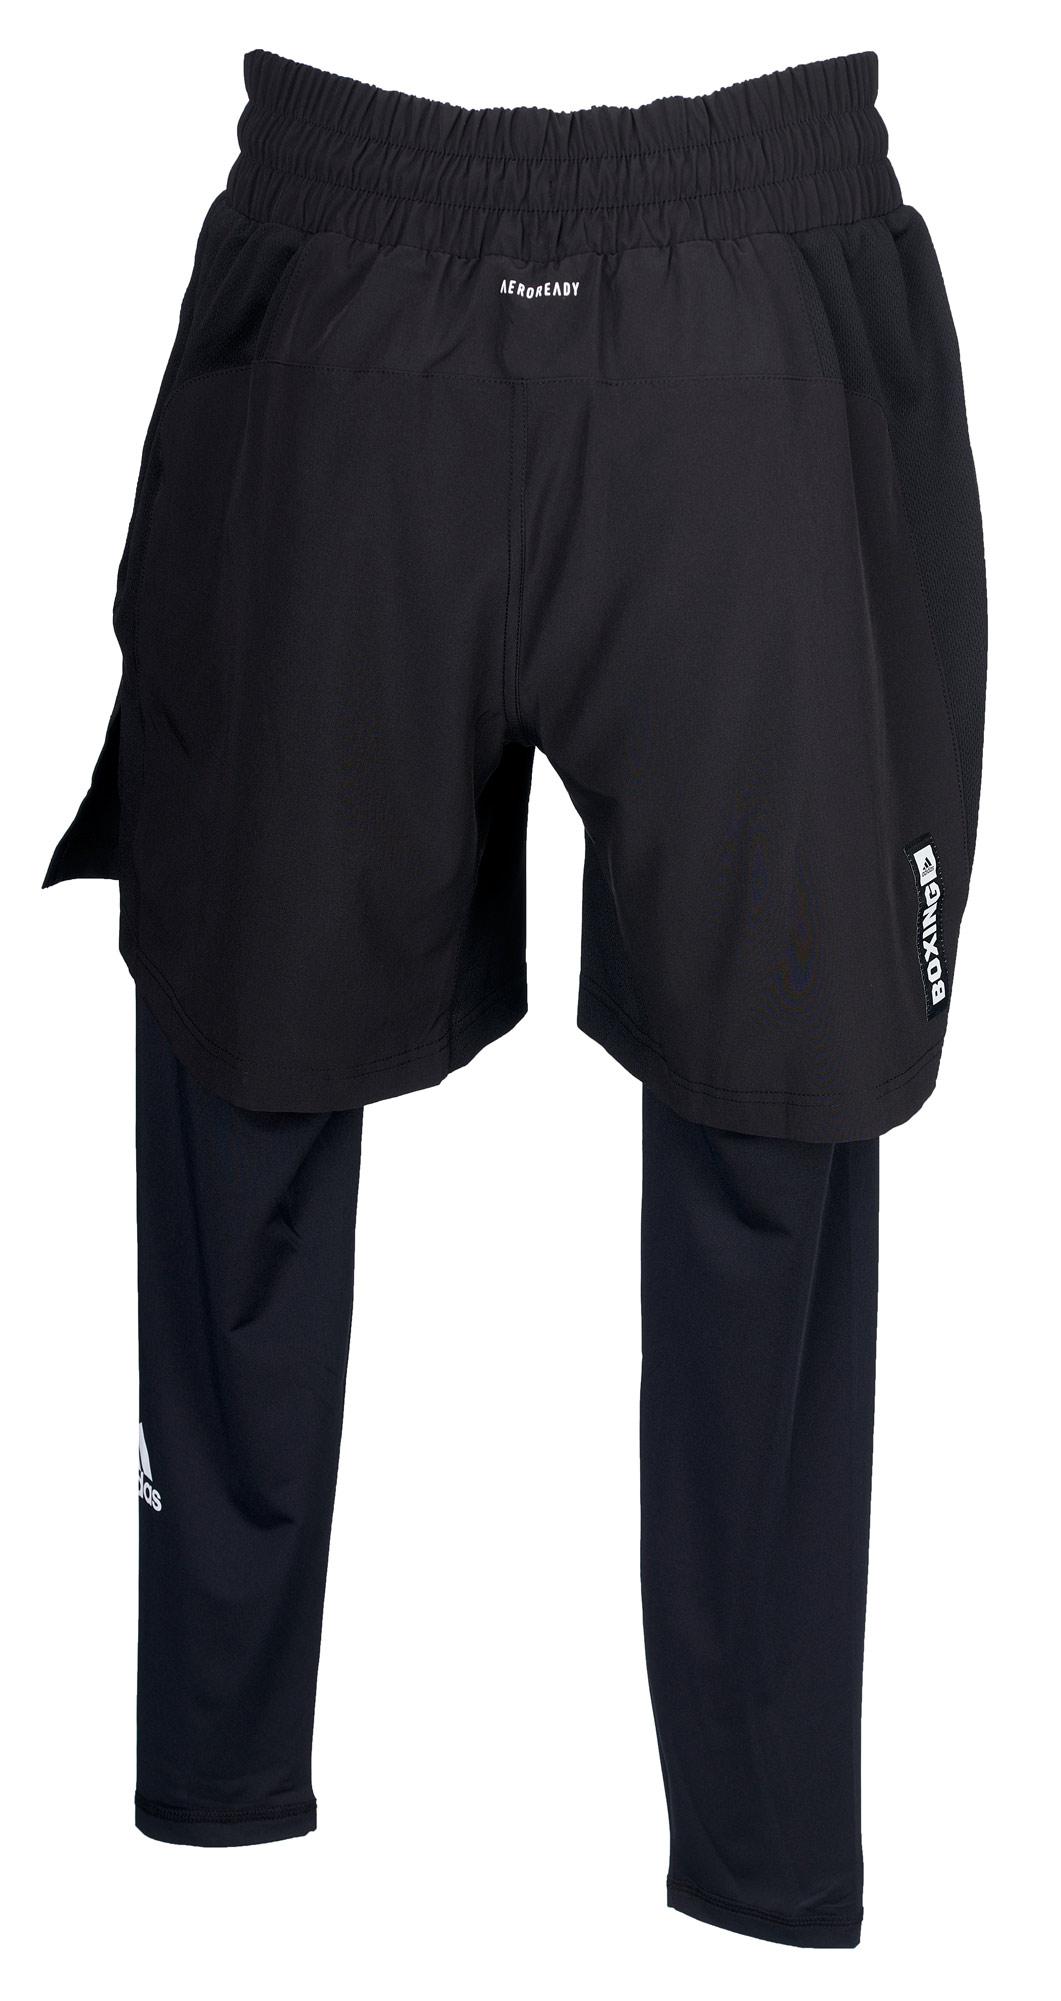 adidas boxing wear tech shorts with spats BXWTSH03